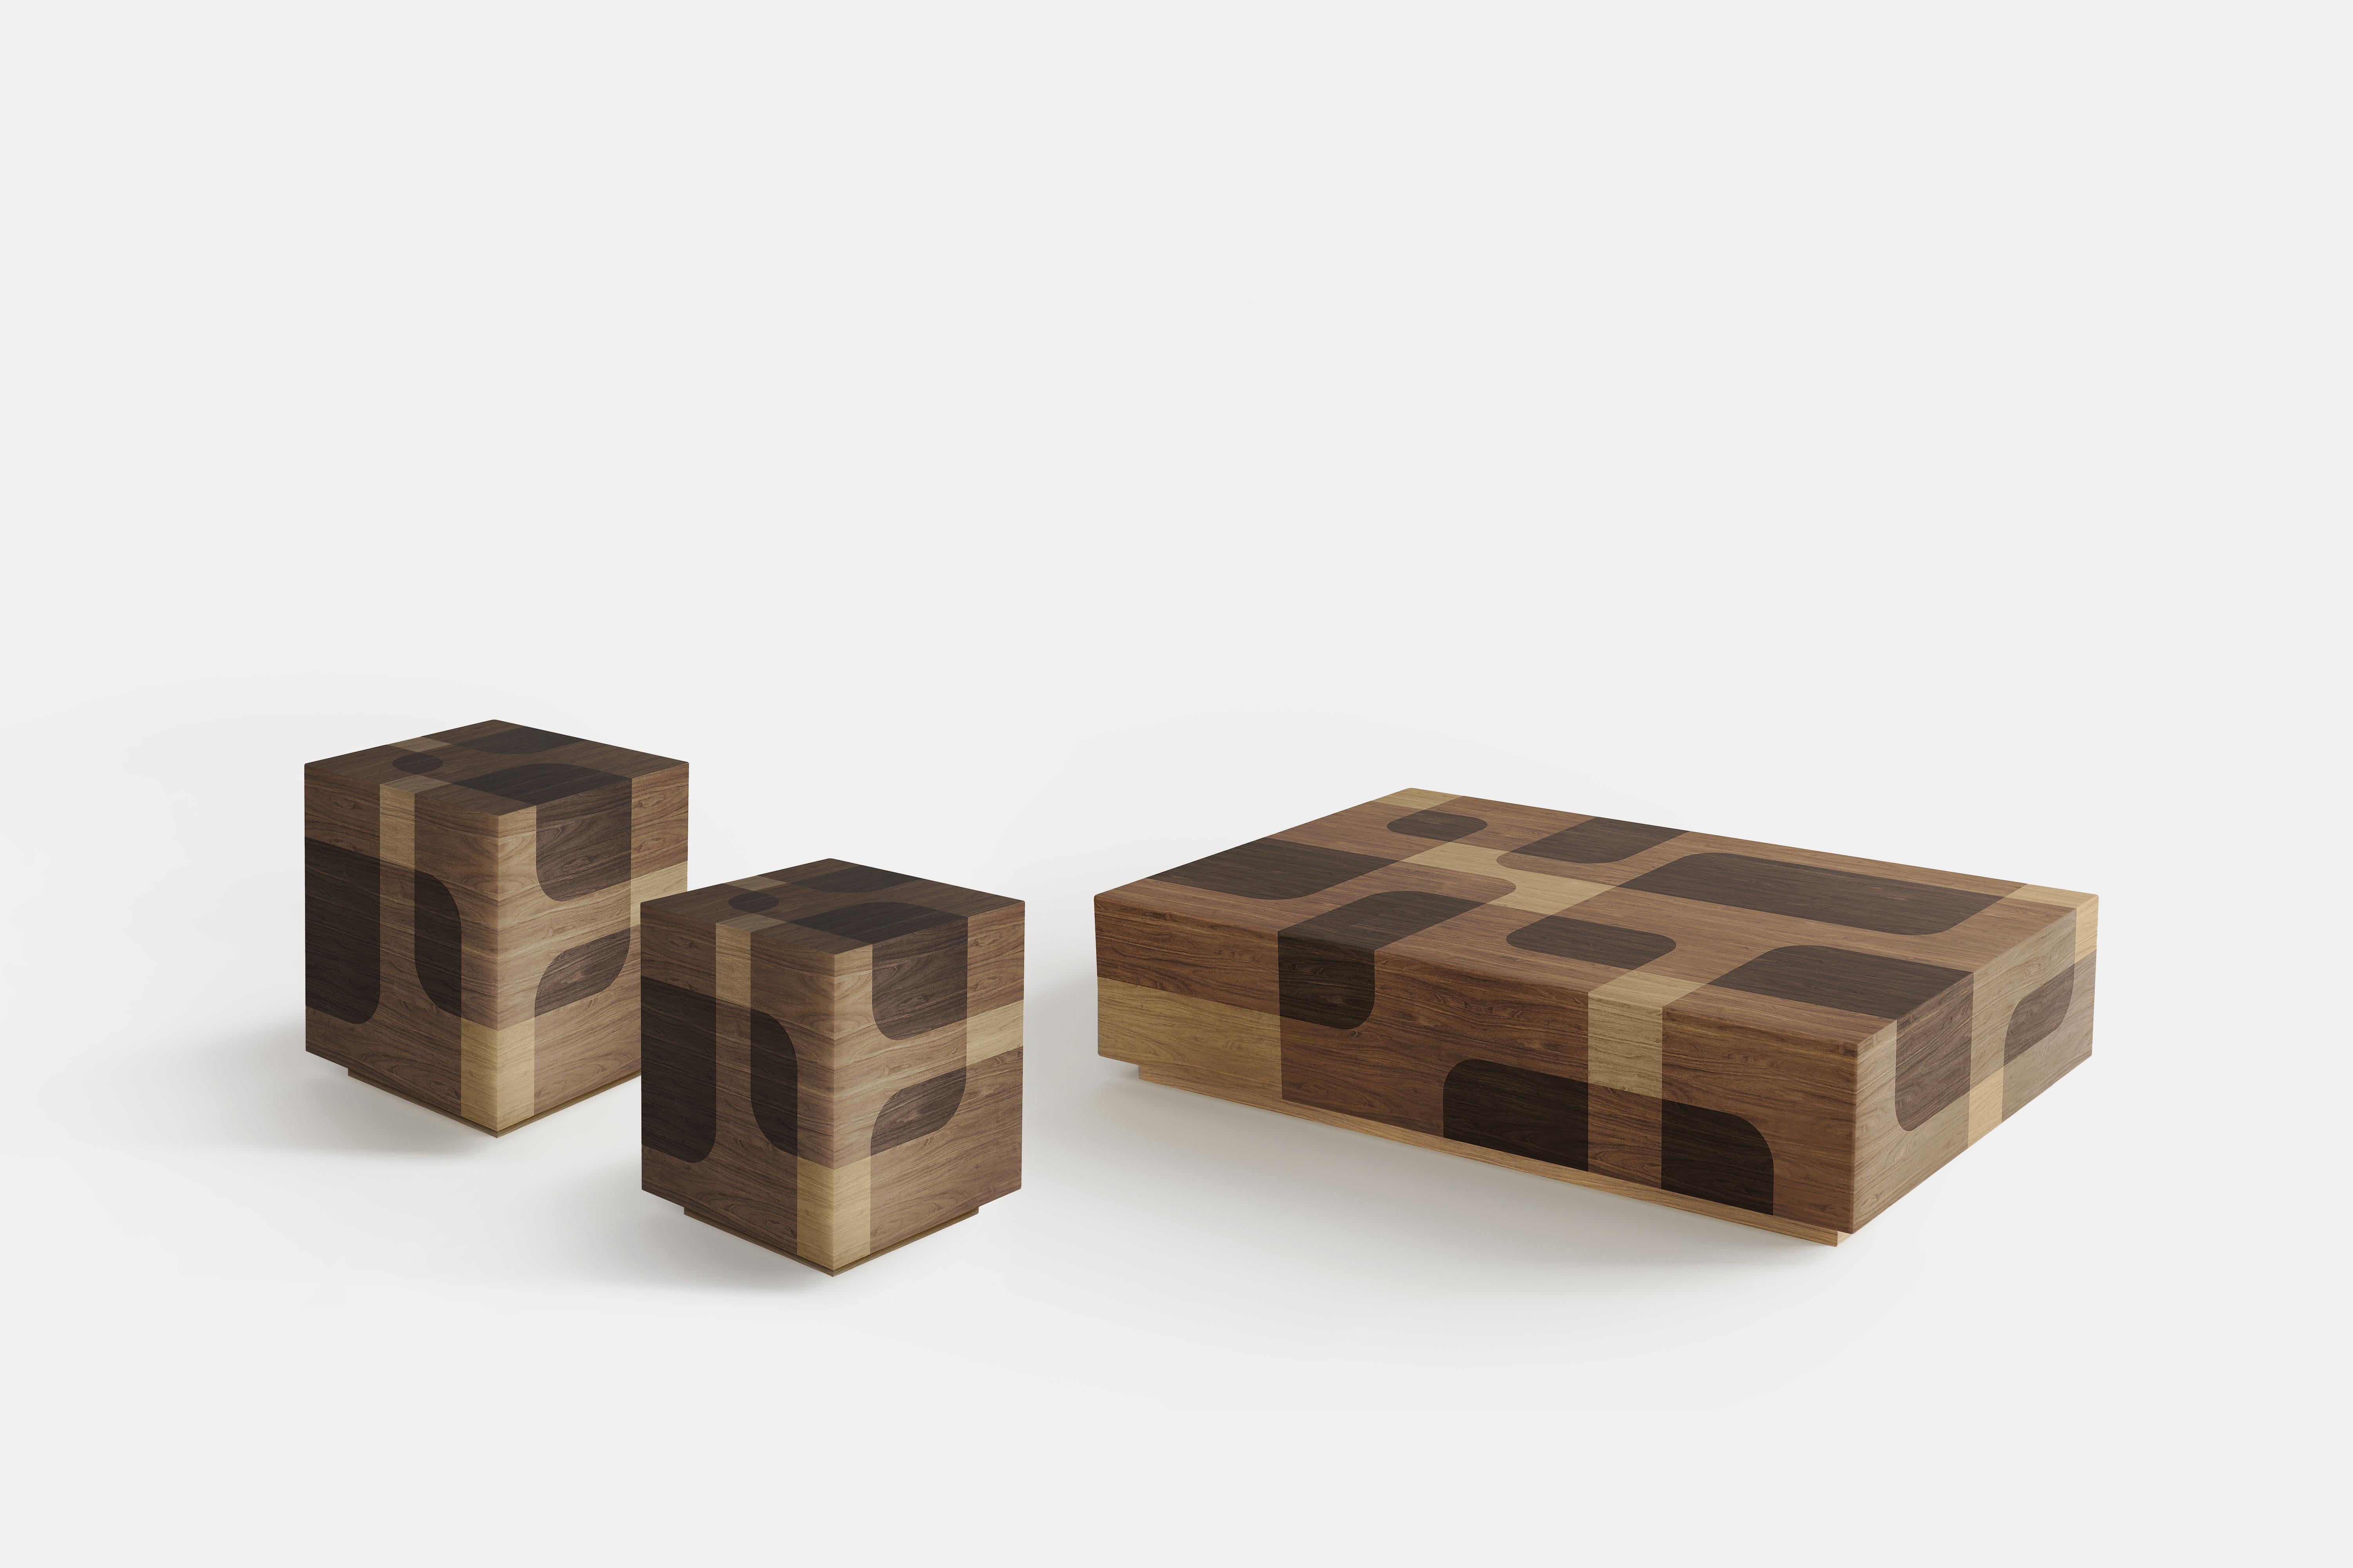 2 Bodega Nightstands and 1 Coffee Table in Warm Wood Marquetry by Joel Escalona (Mexikanisch) im Angebot